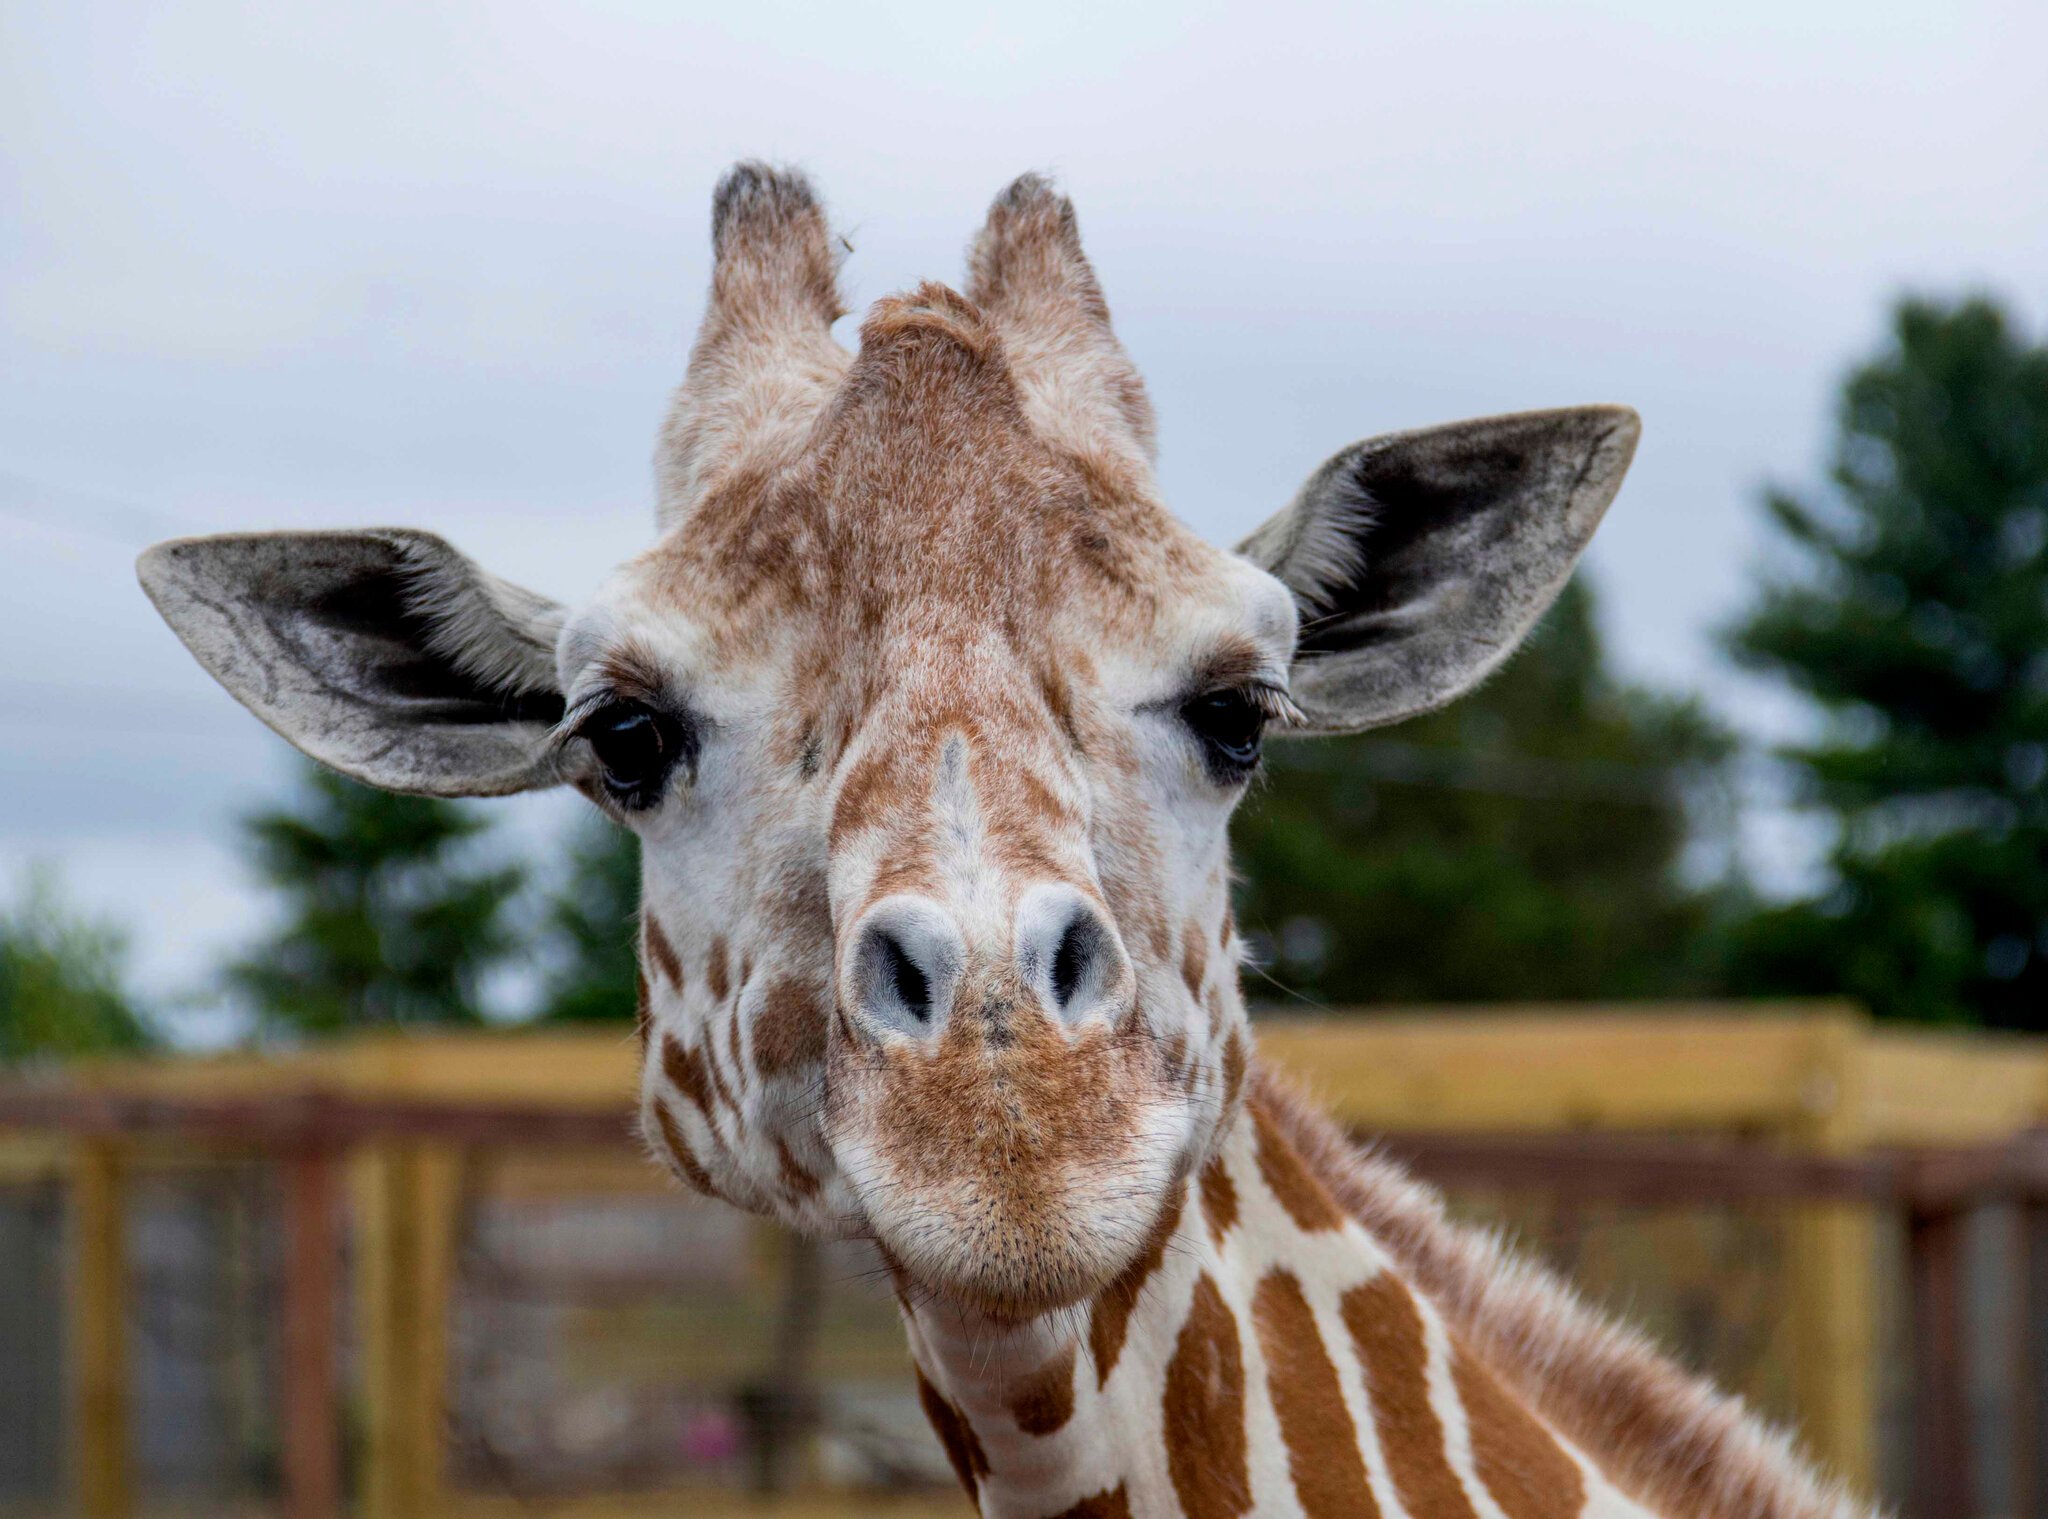 27 Fascinating Facts about Giraffes You Might Not Know